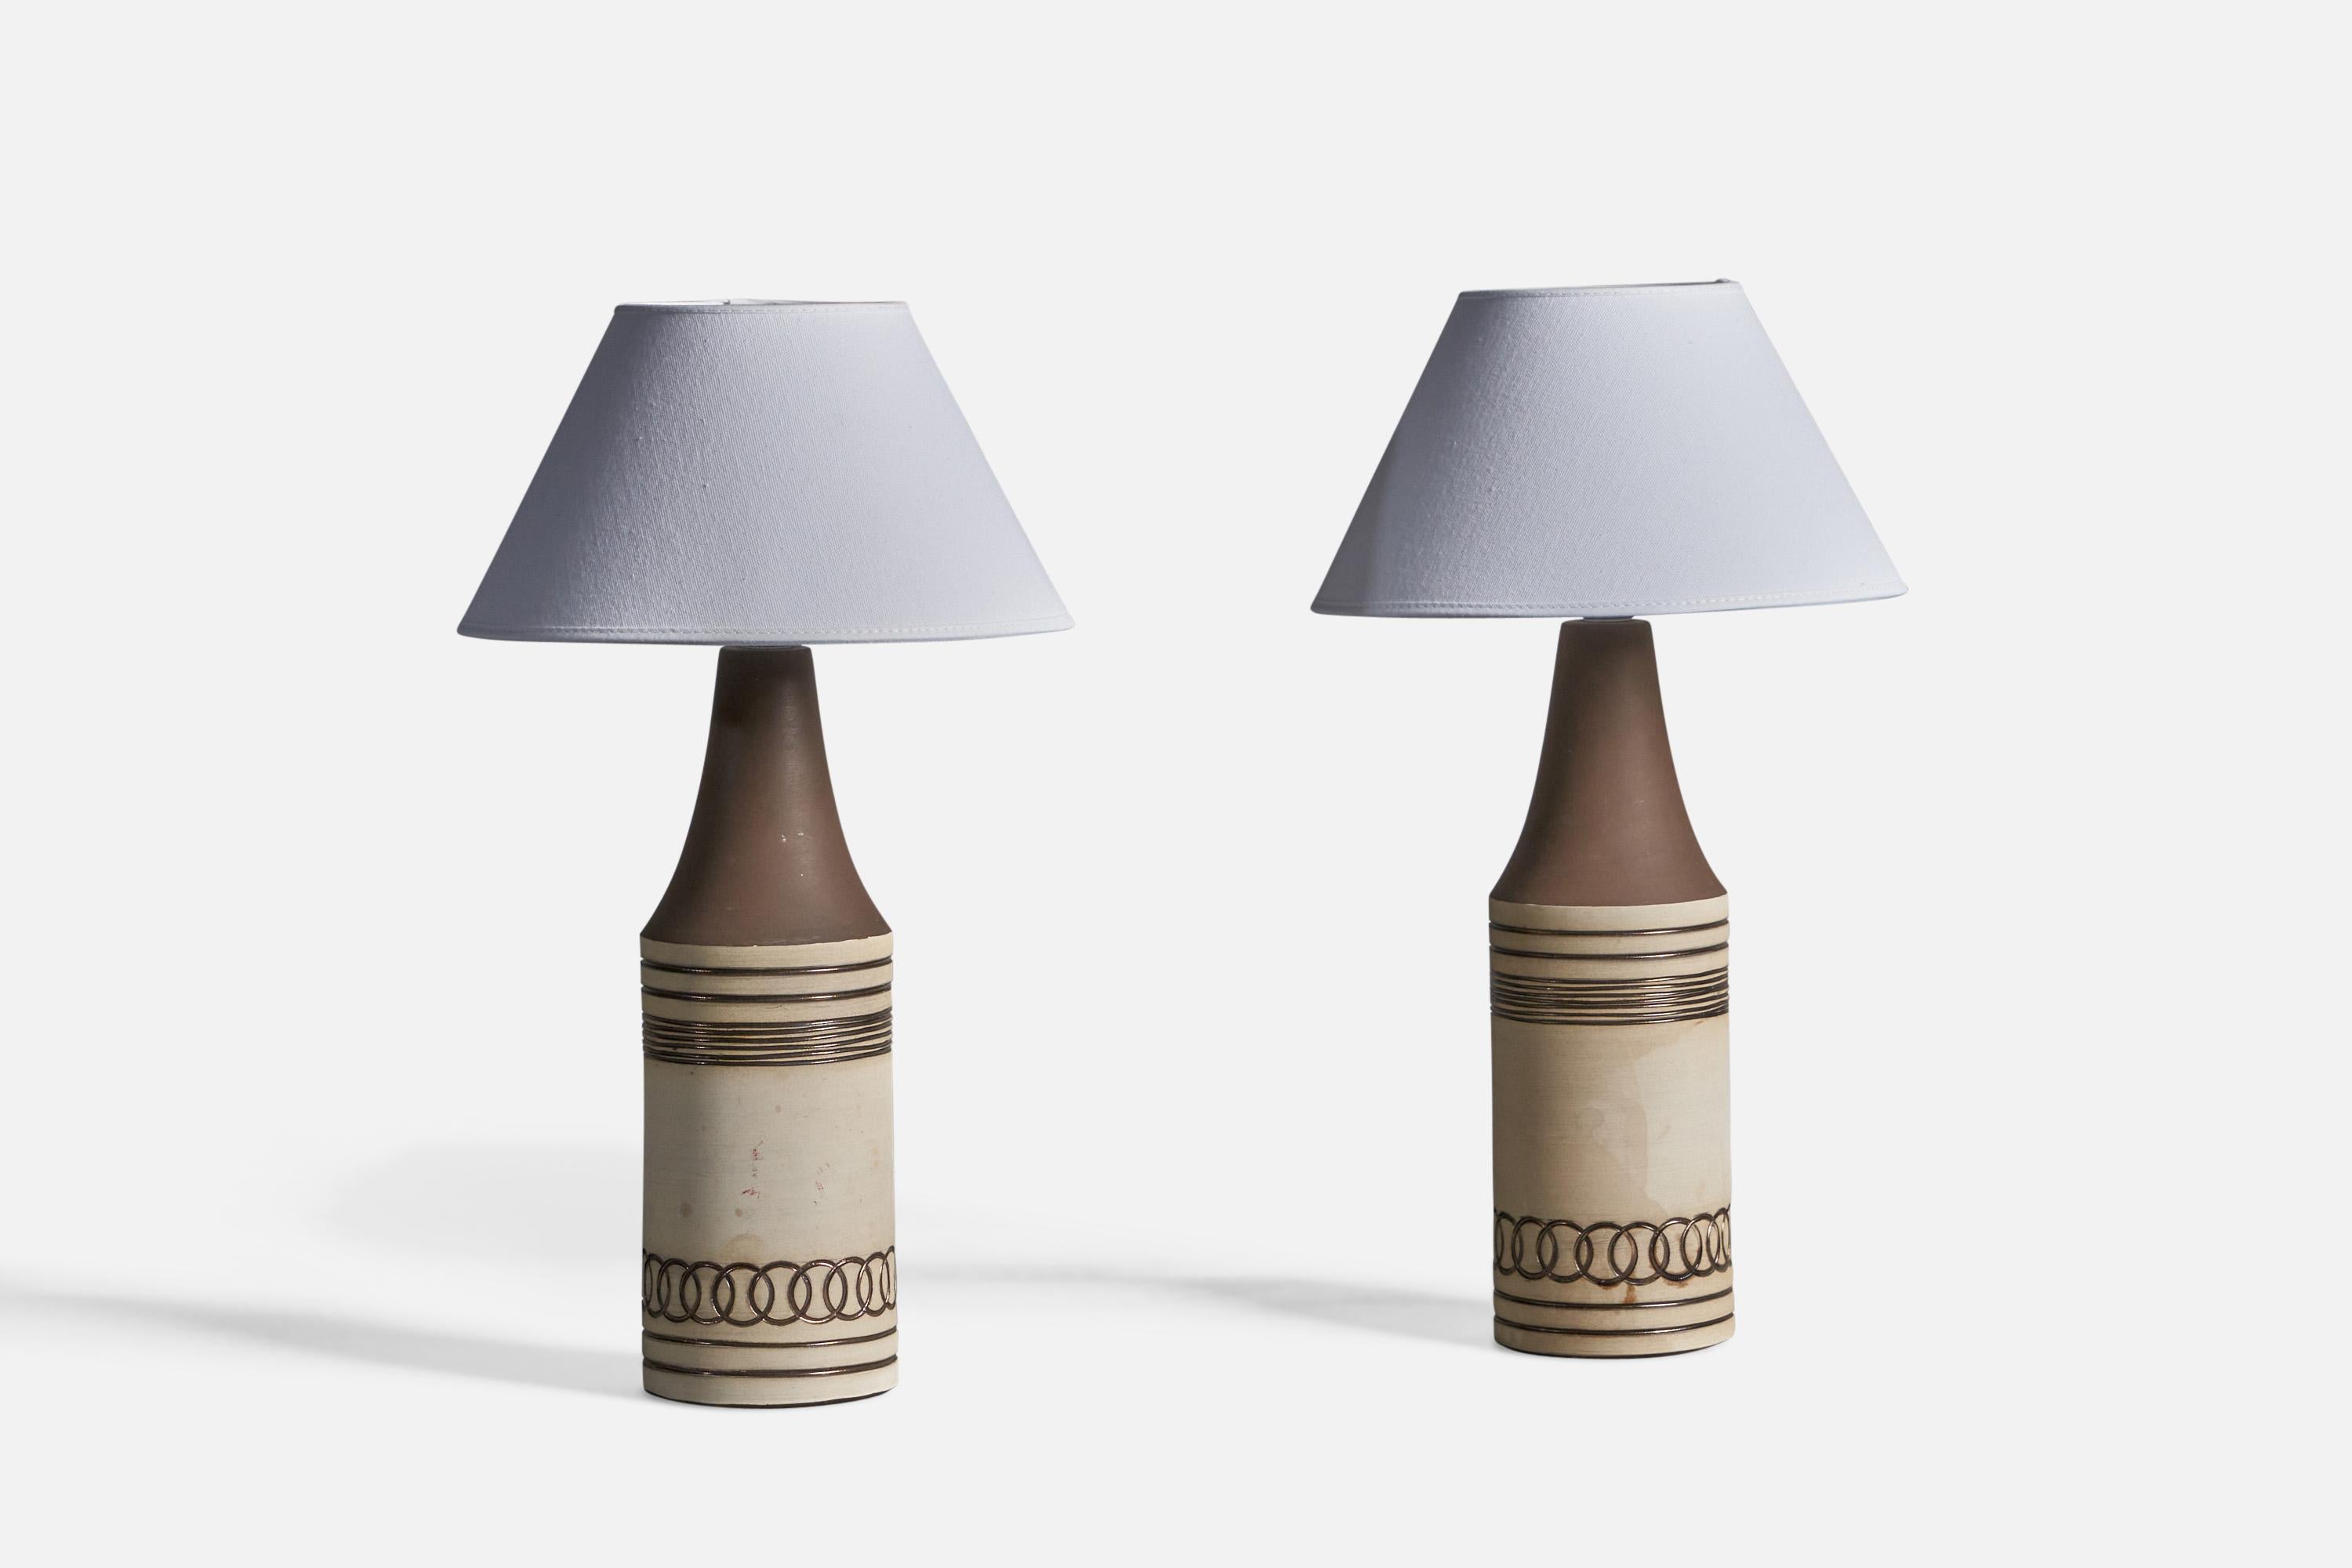 
A pair of brown and off-white stoneware table lamps designed and produced in Sweden, 1960s.

Dimensions of Lamp (inches): 14.5